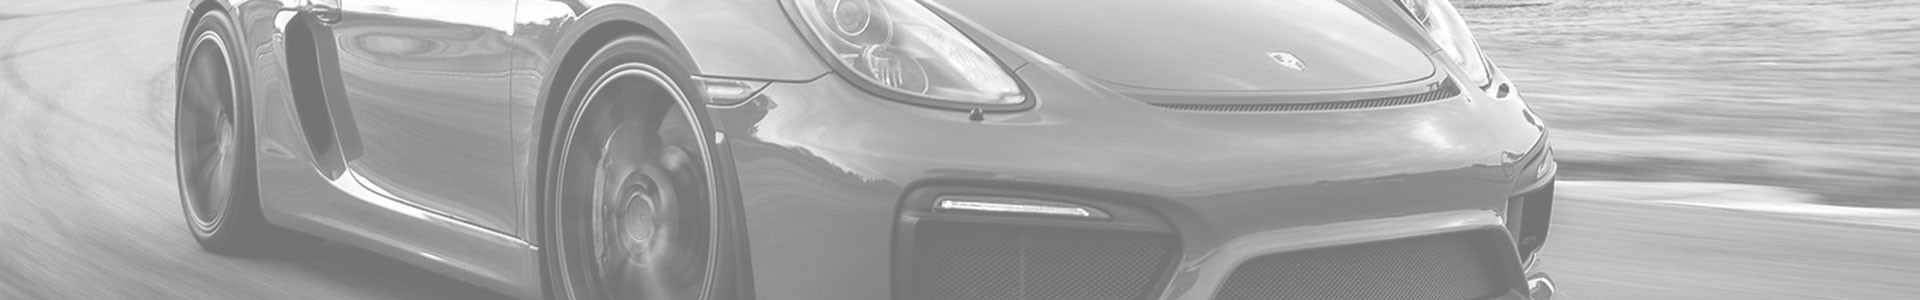 Bumper Stickers - 986 Forum - The Community for Porsche Boxster & Cayman  Owners